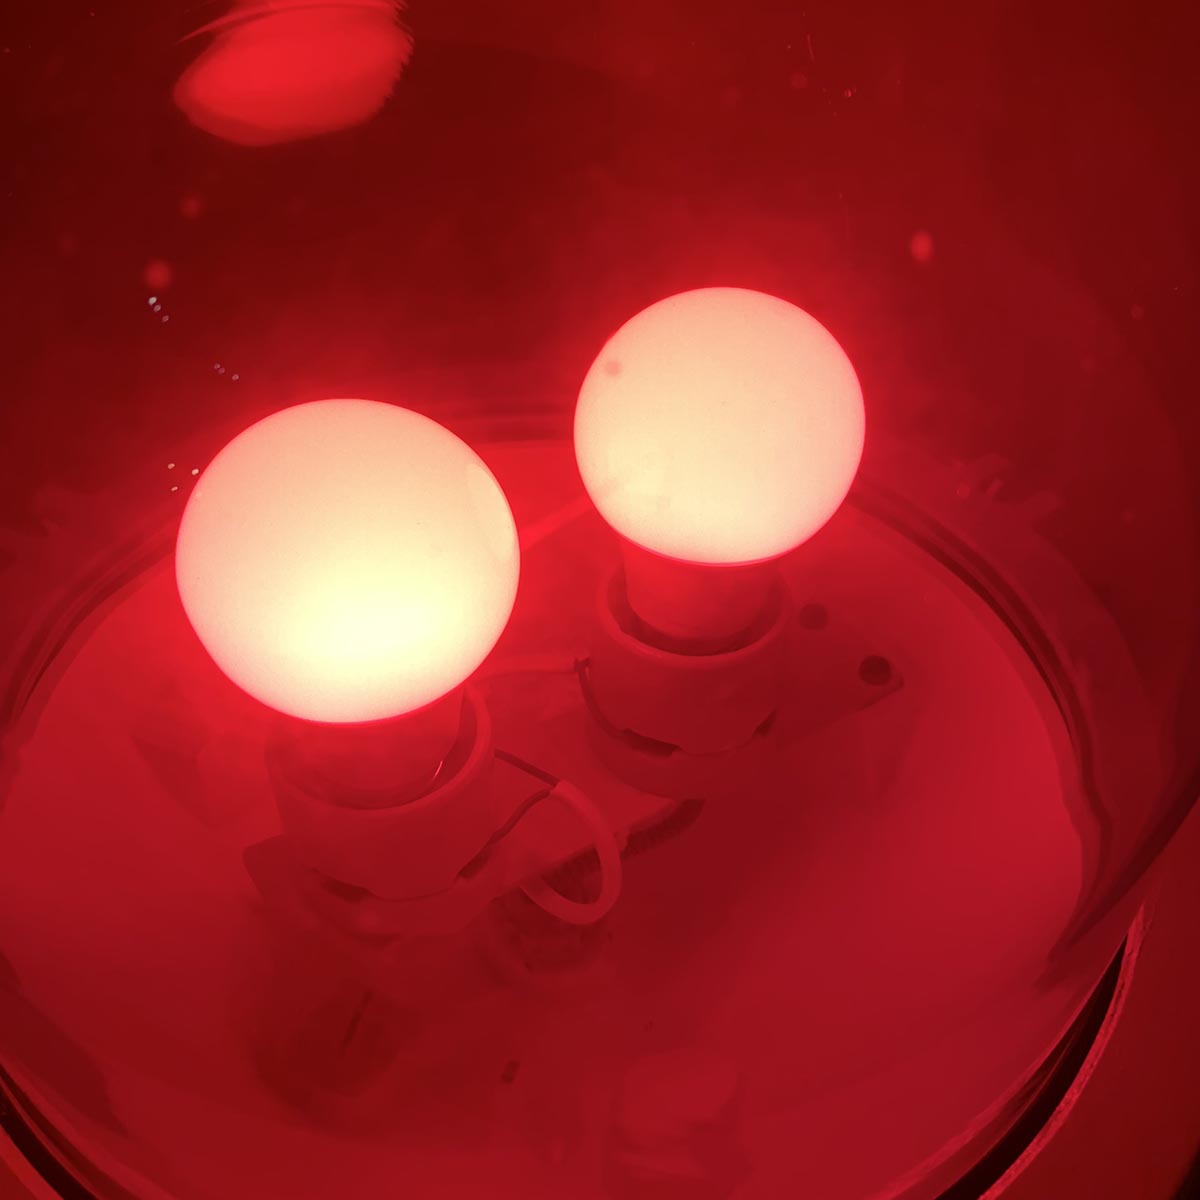 Detail of the two LED bulbs in a AEG obstruction light.